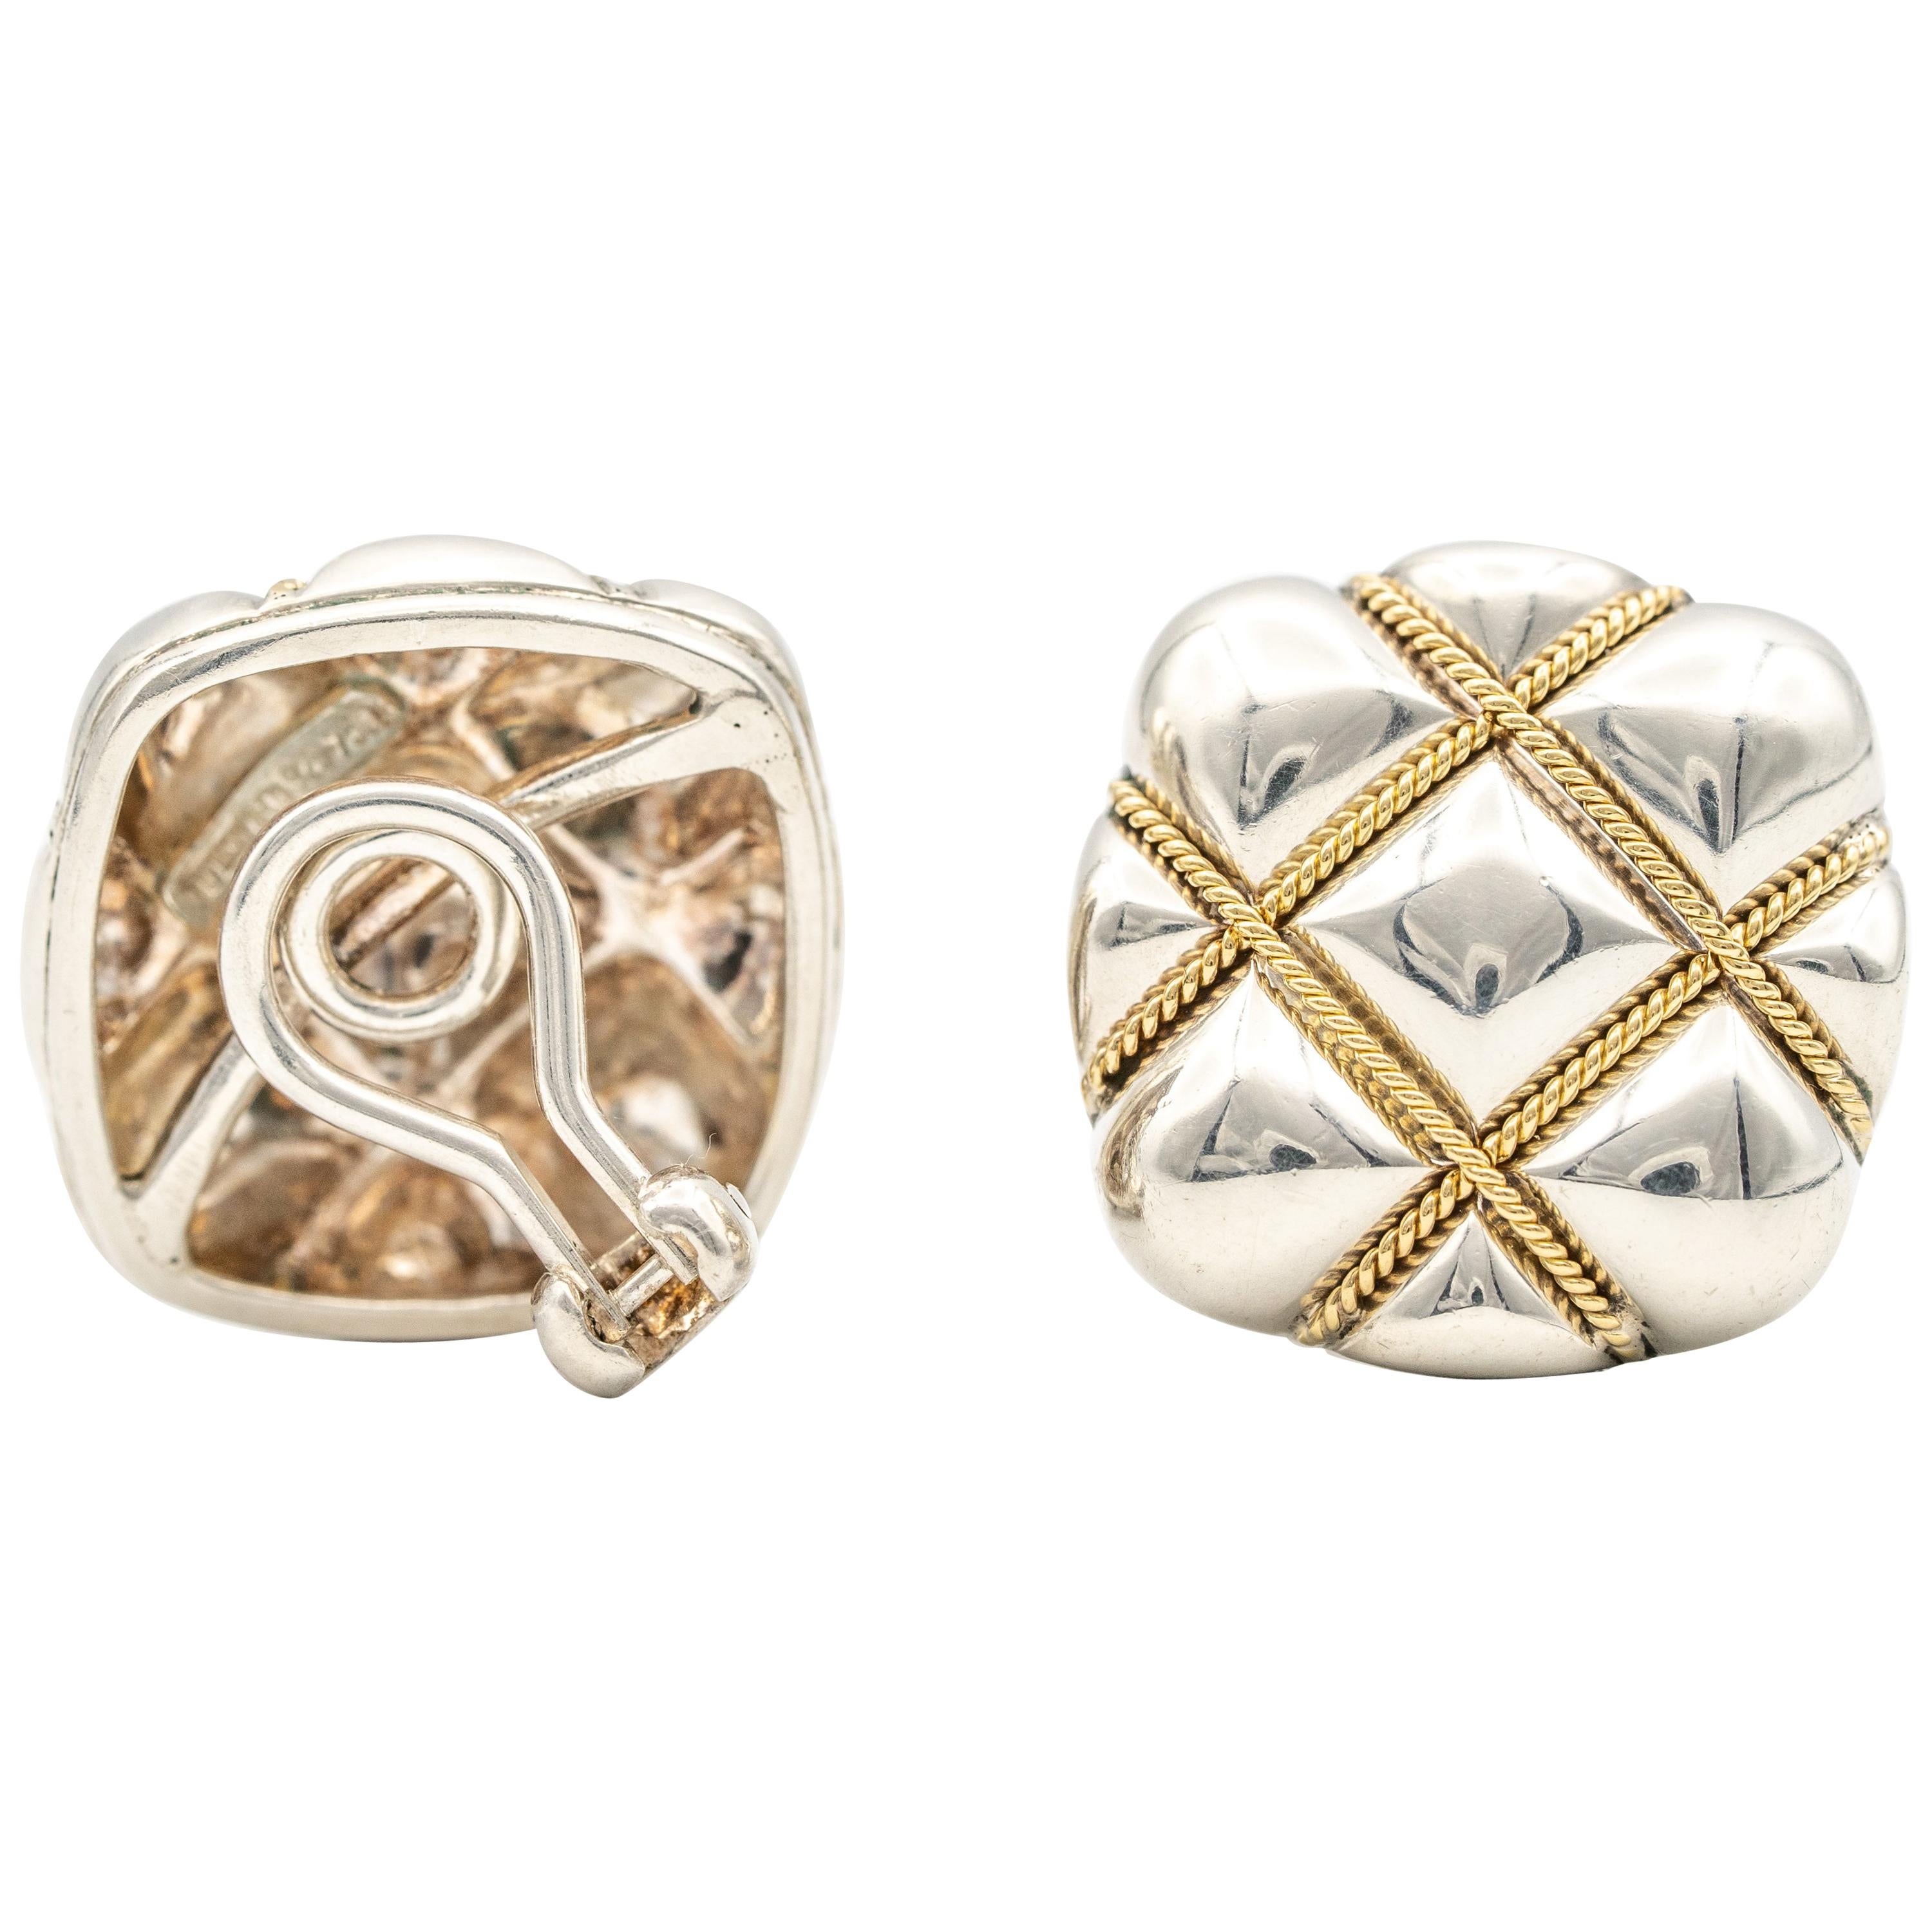 Tiffany & Co. Quilted Sterling Silver and 18 Karat Gold Earrings